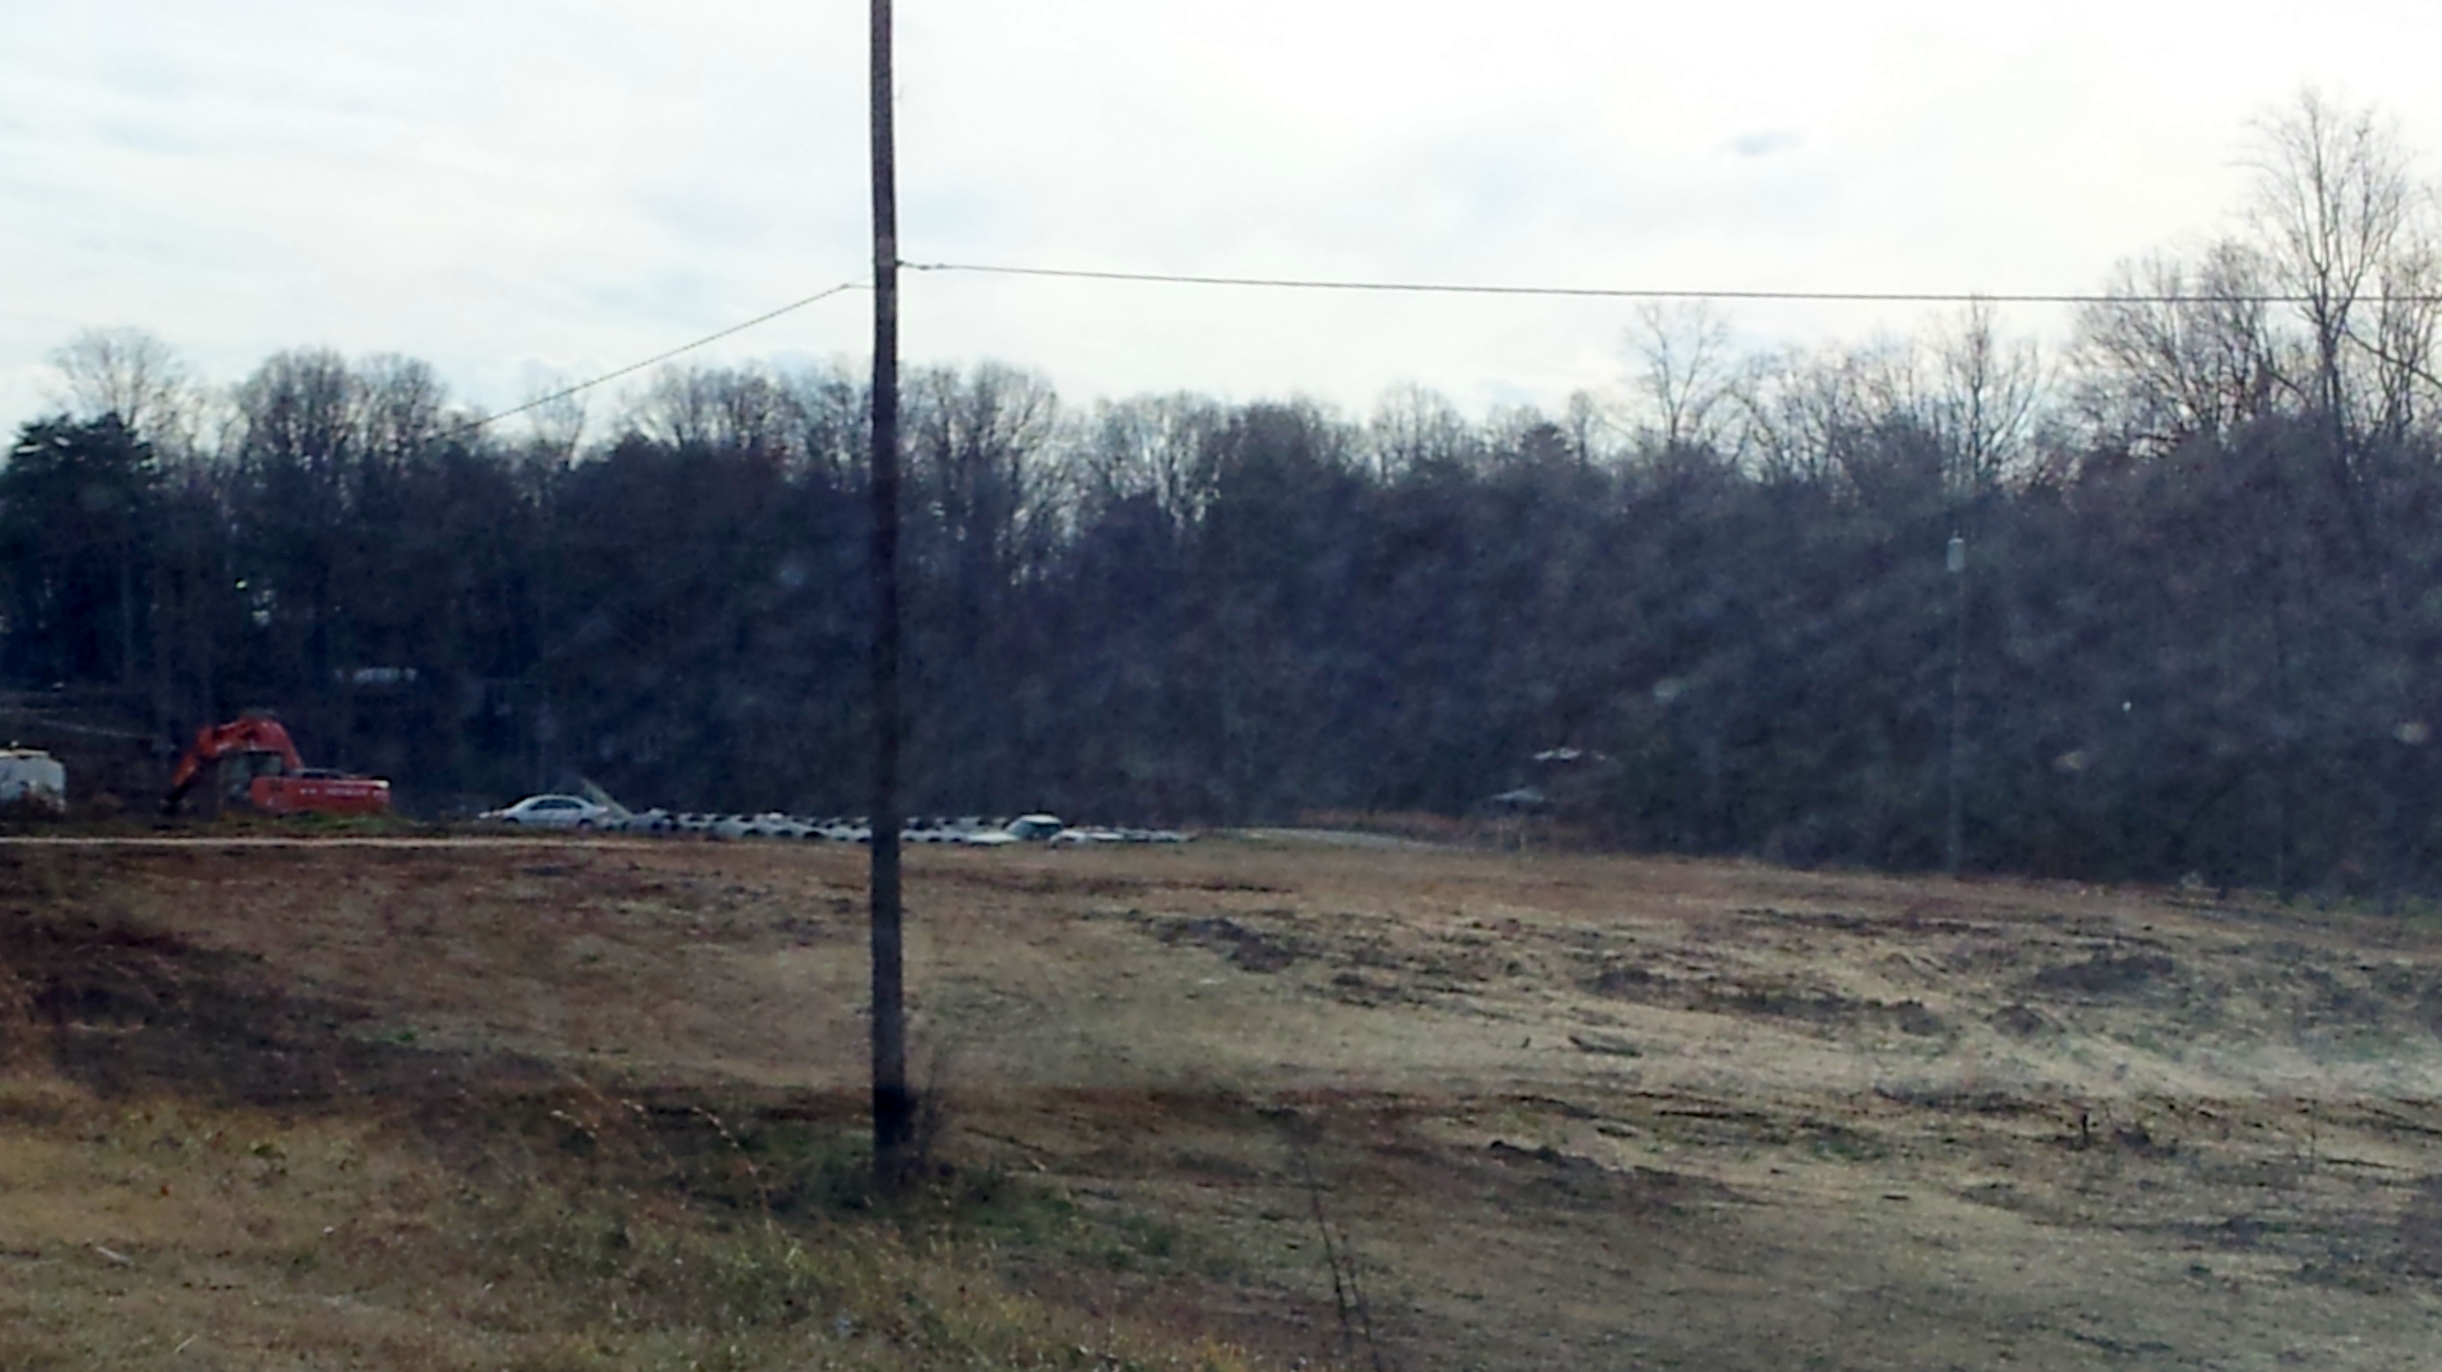 Photo of US 220 widening construction near US 158 north of Greensboro, Dec. 
2012, courtesy of Strider